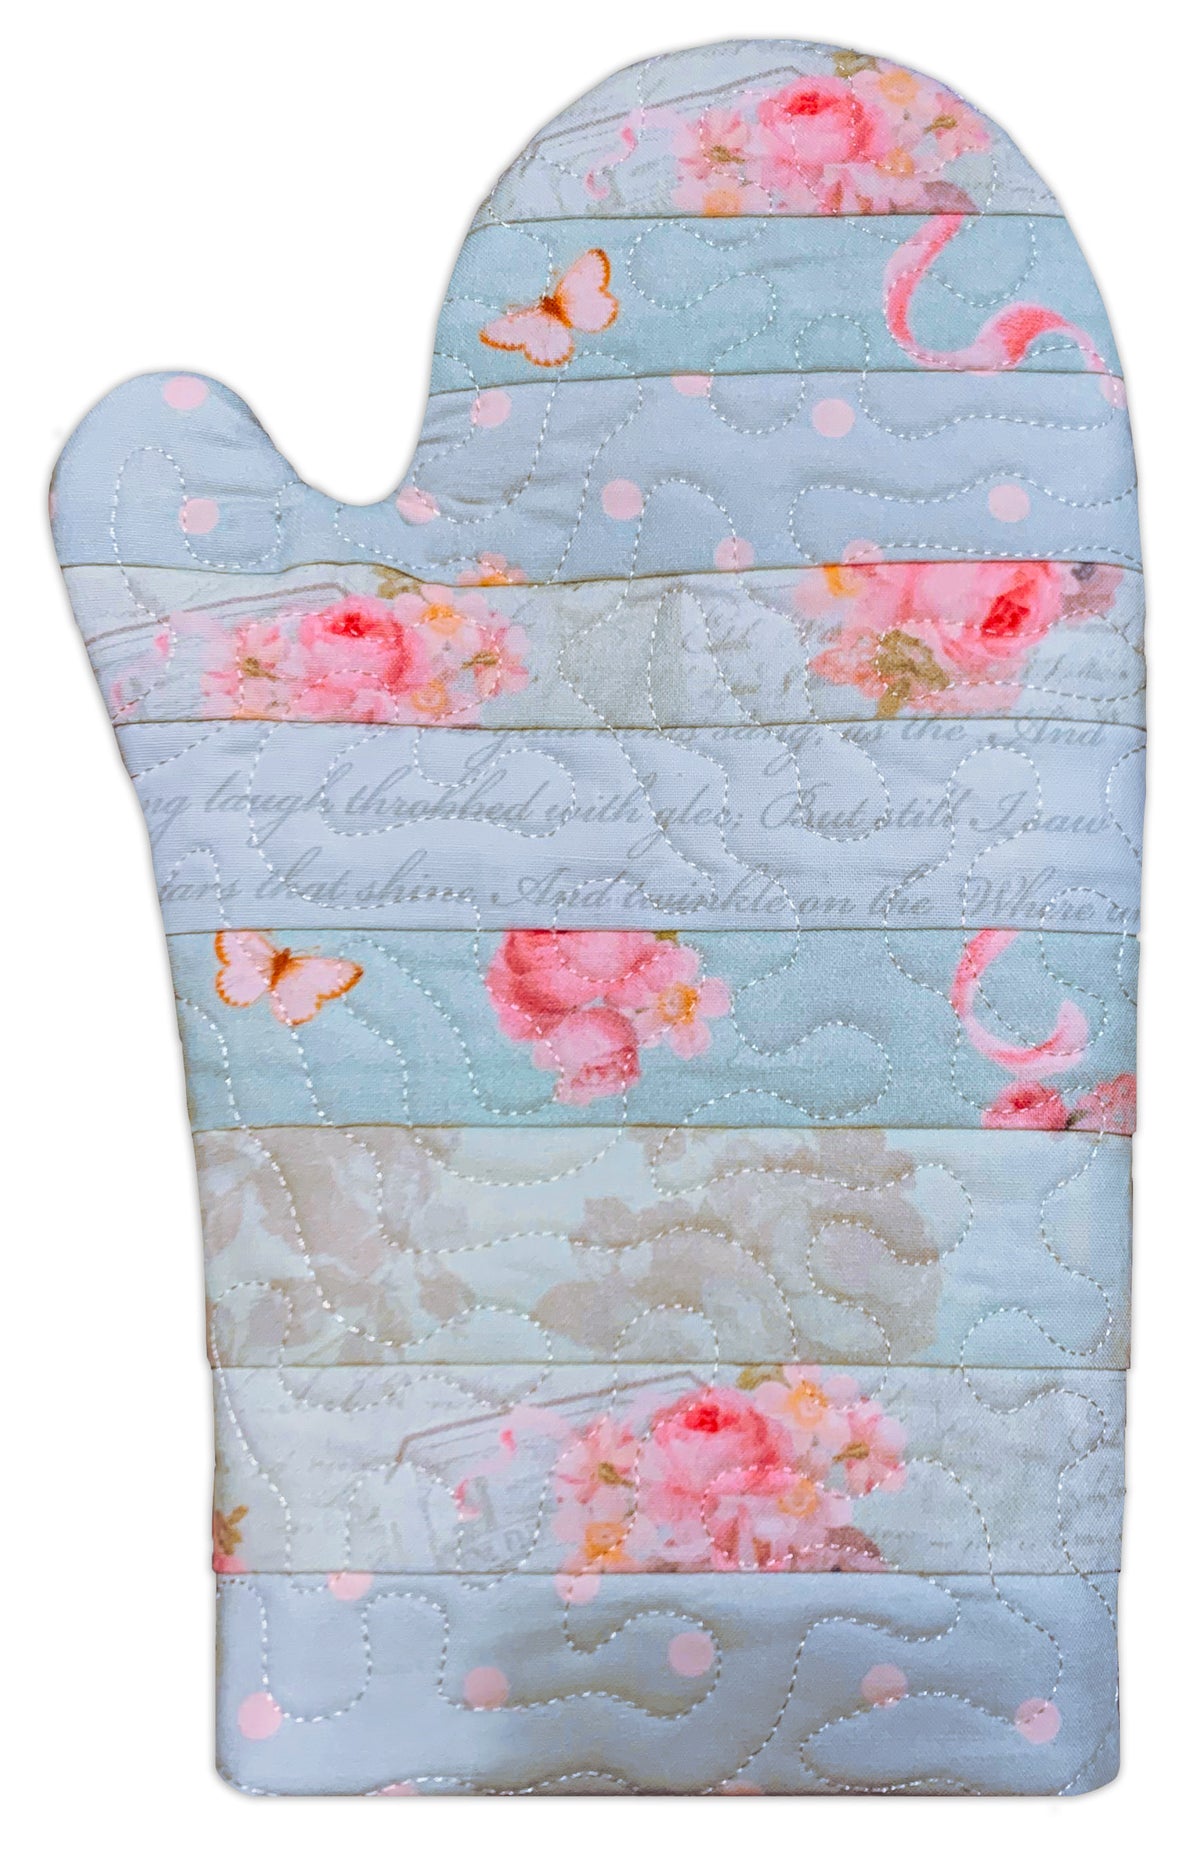 Jelly Roll Oven Mitts Design Set